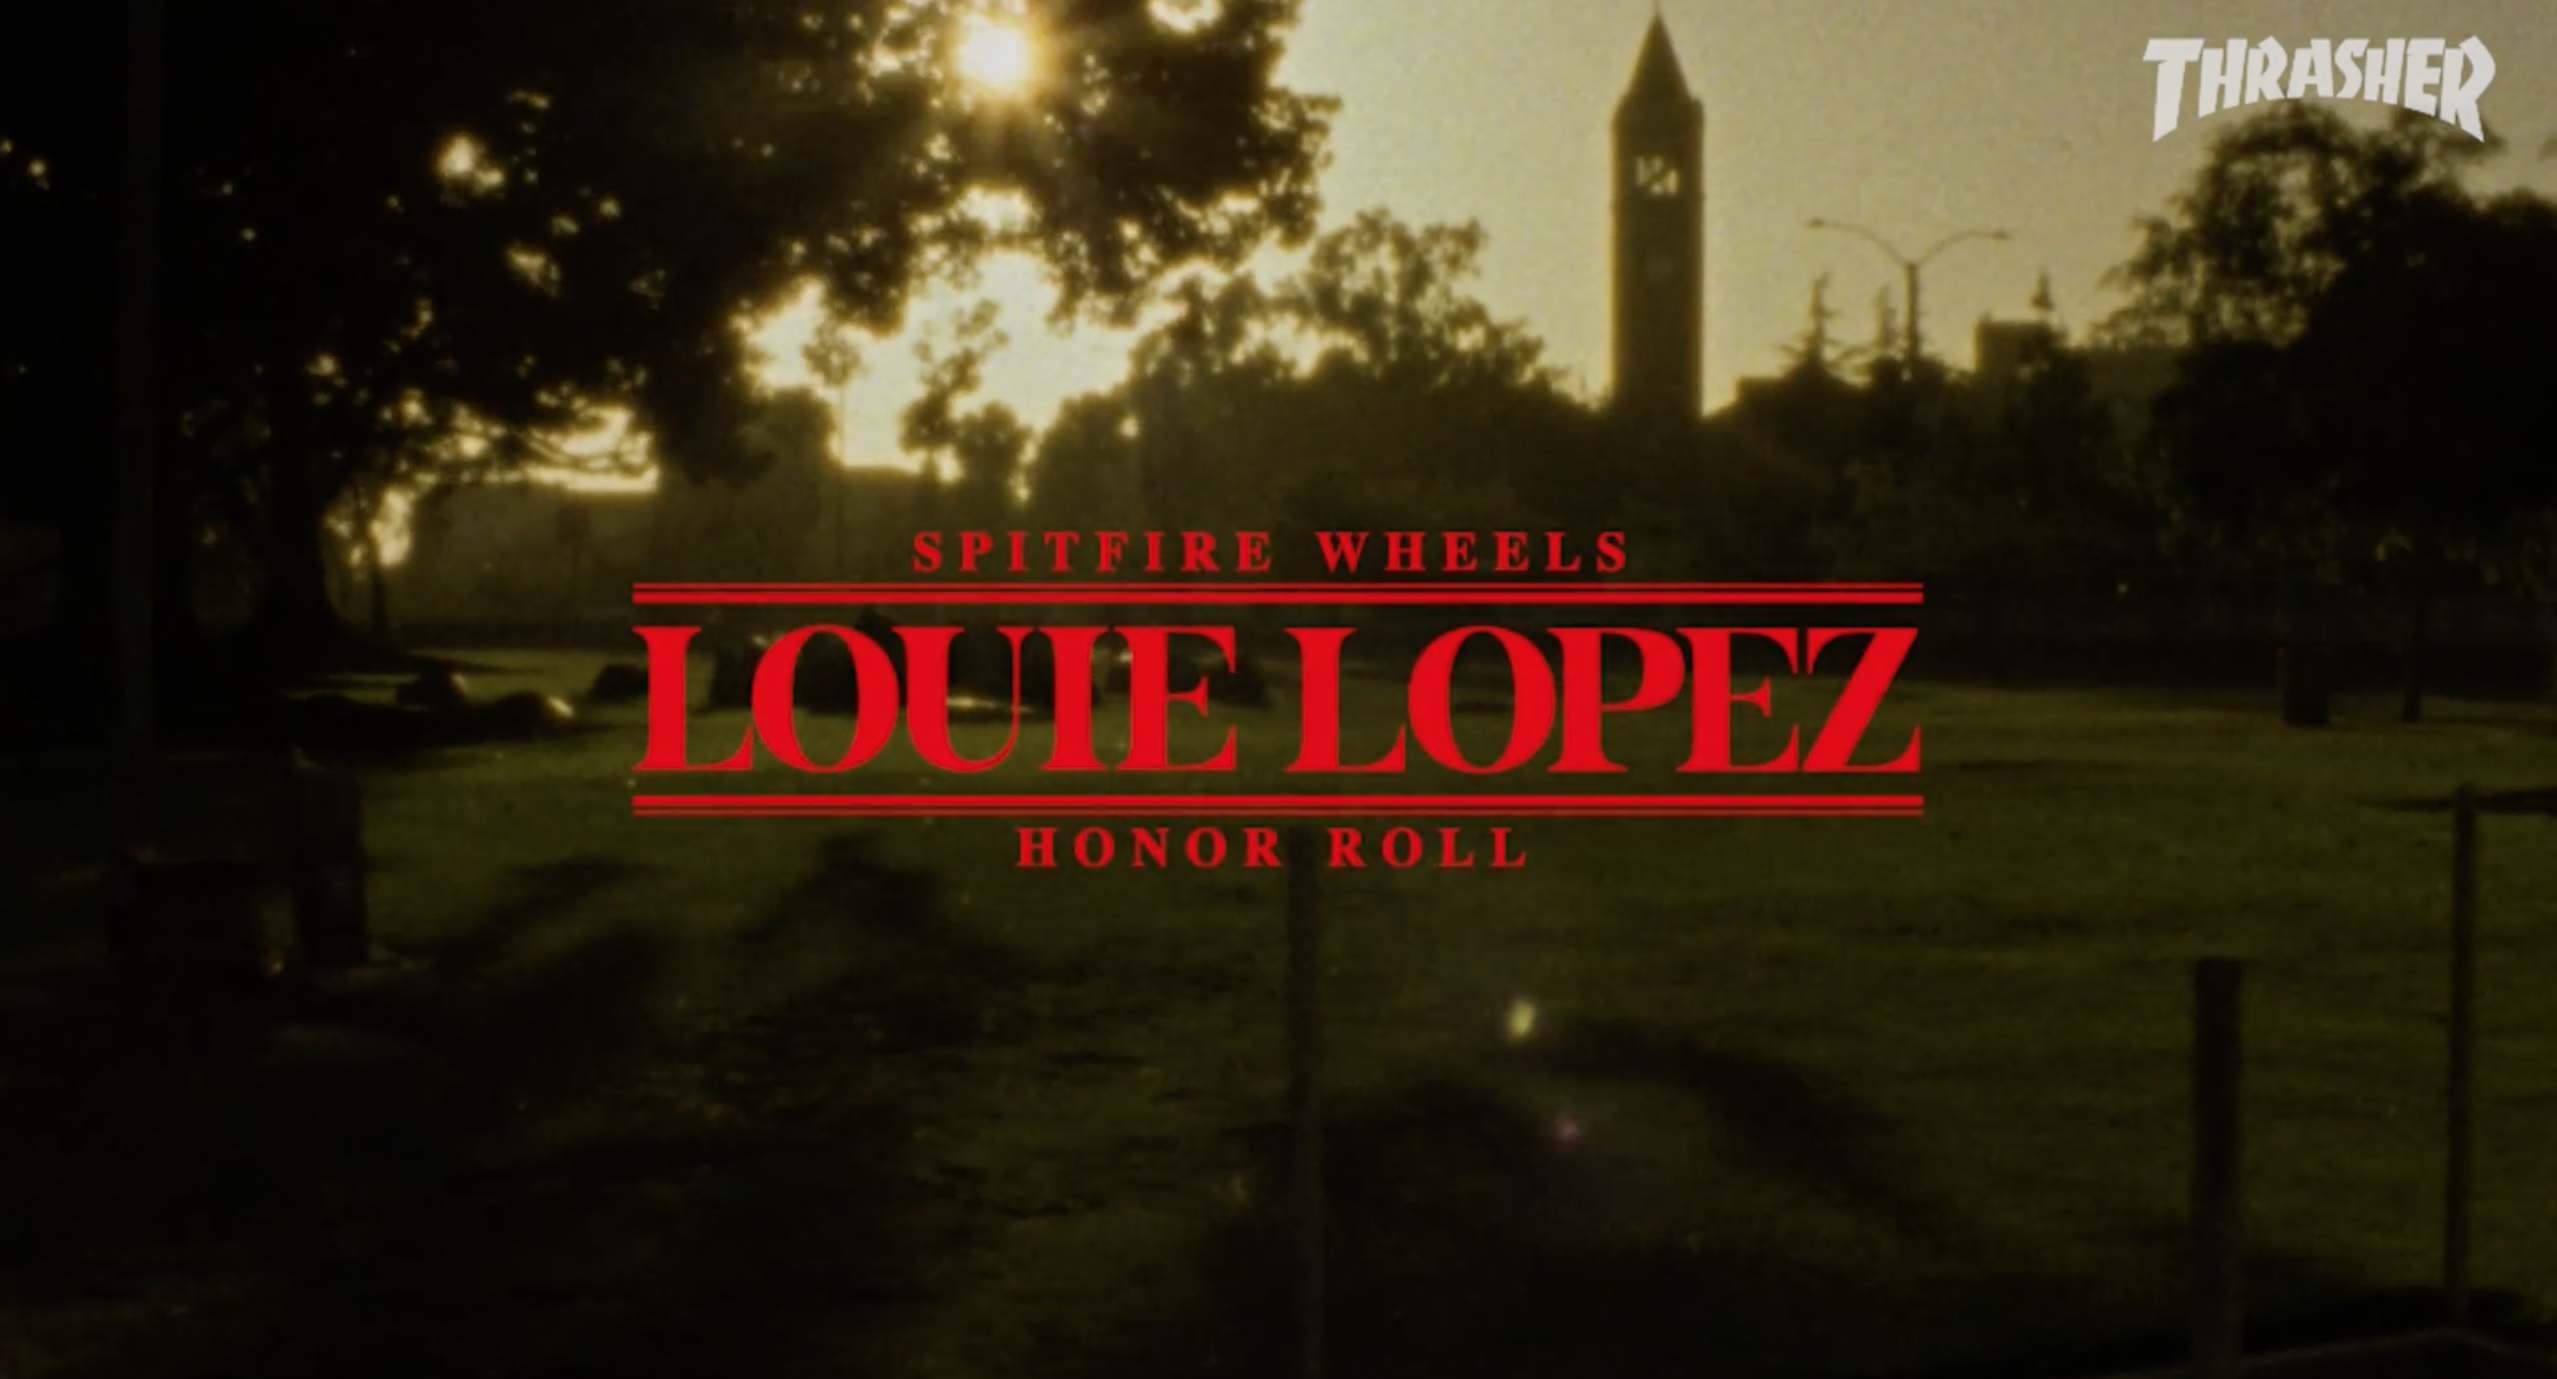 Spitfire - Louie Lopez "Honor Roll" cover